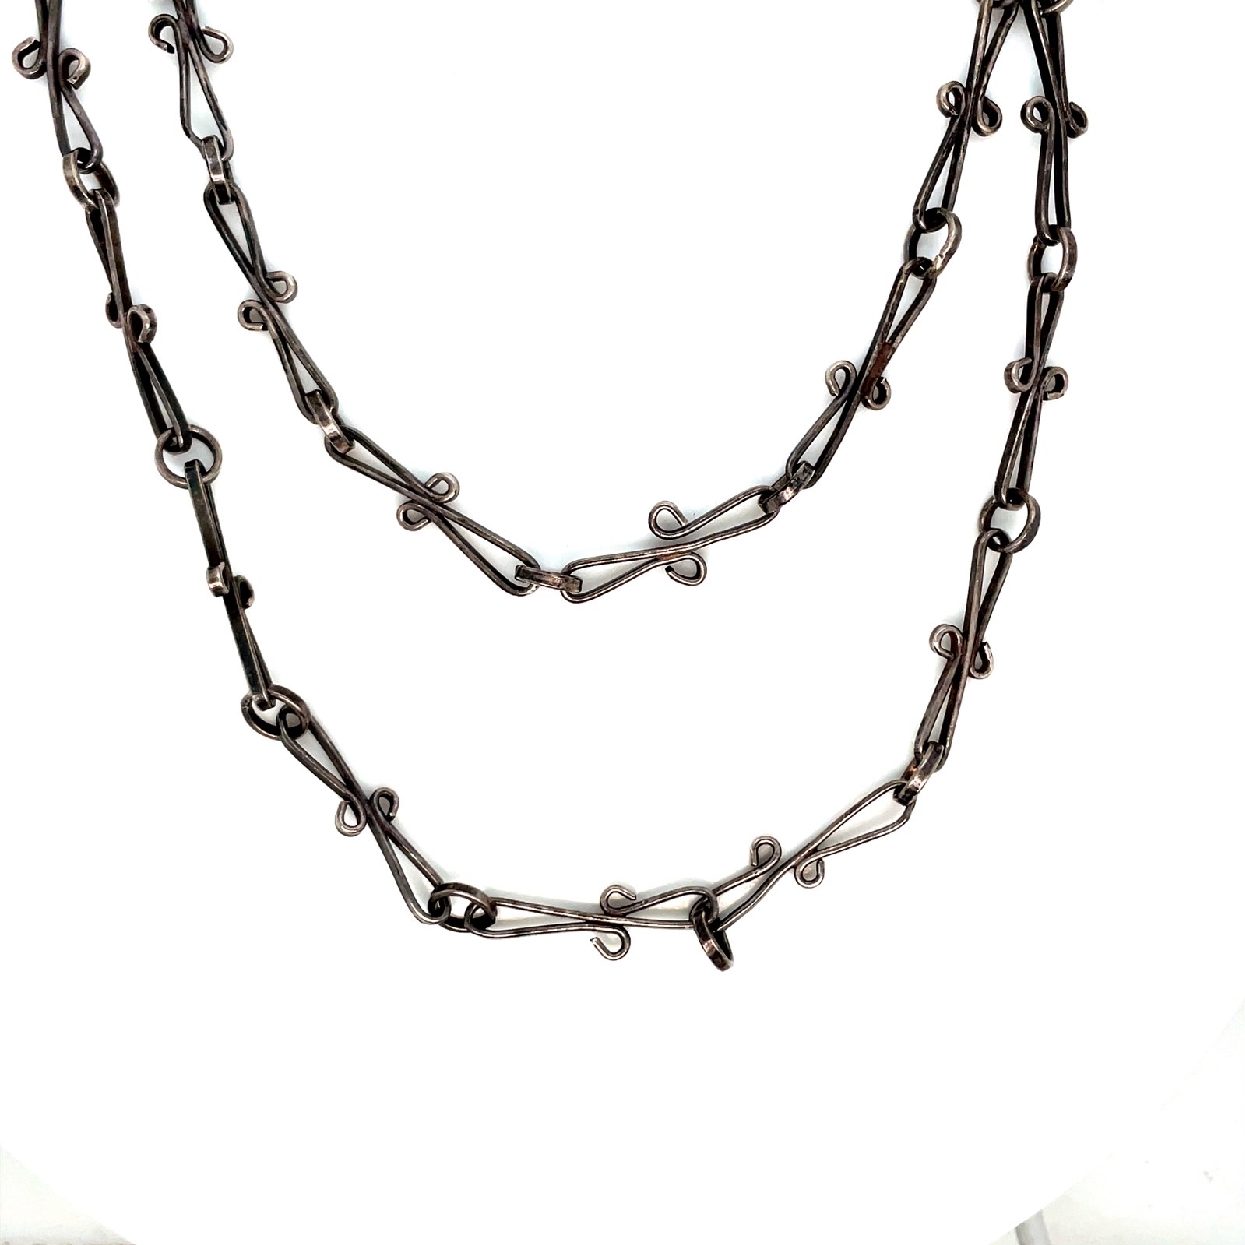 Intricate Sterling Silver Chain

30 Inches